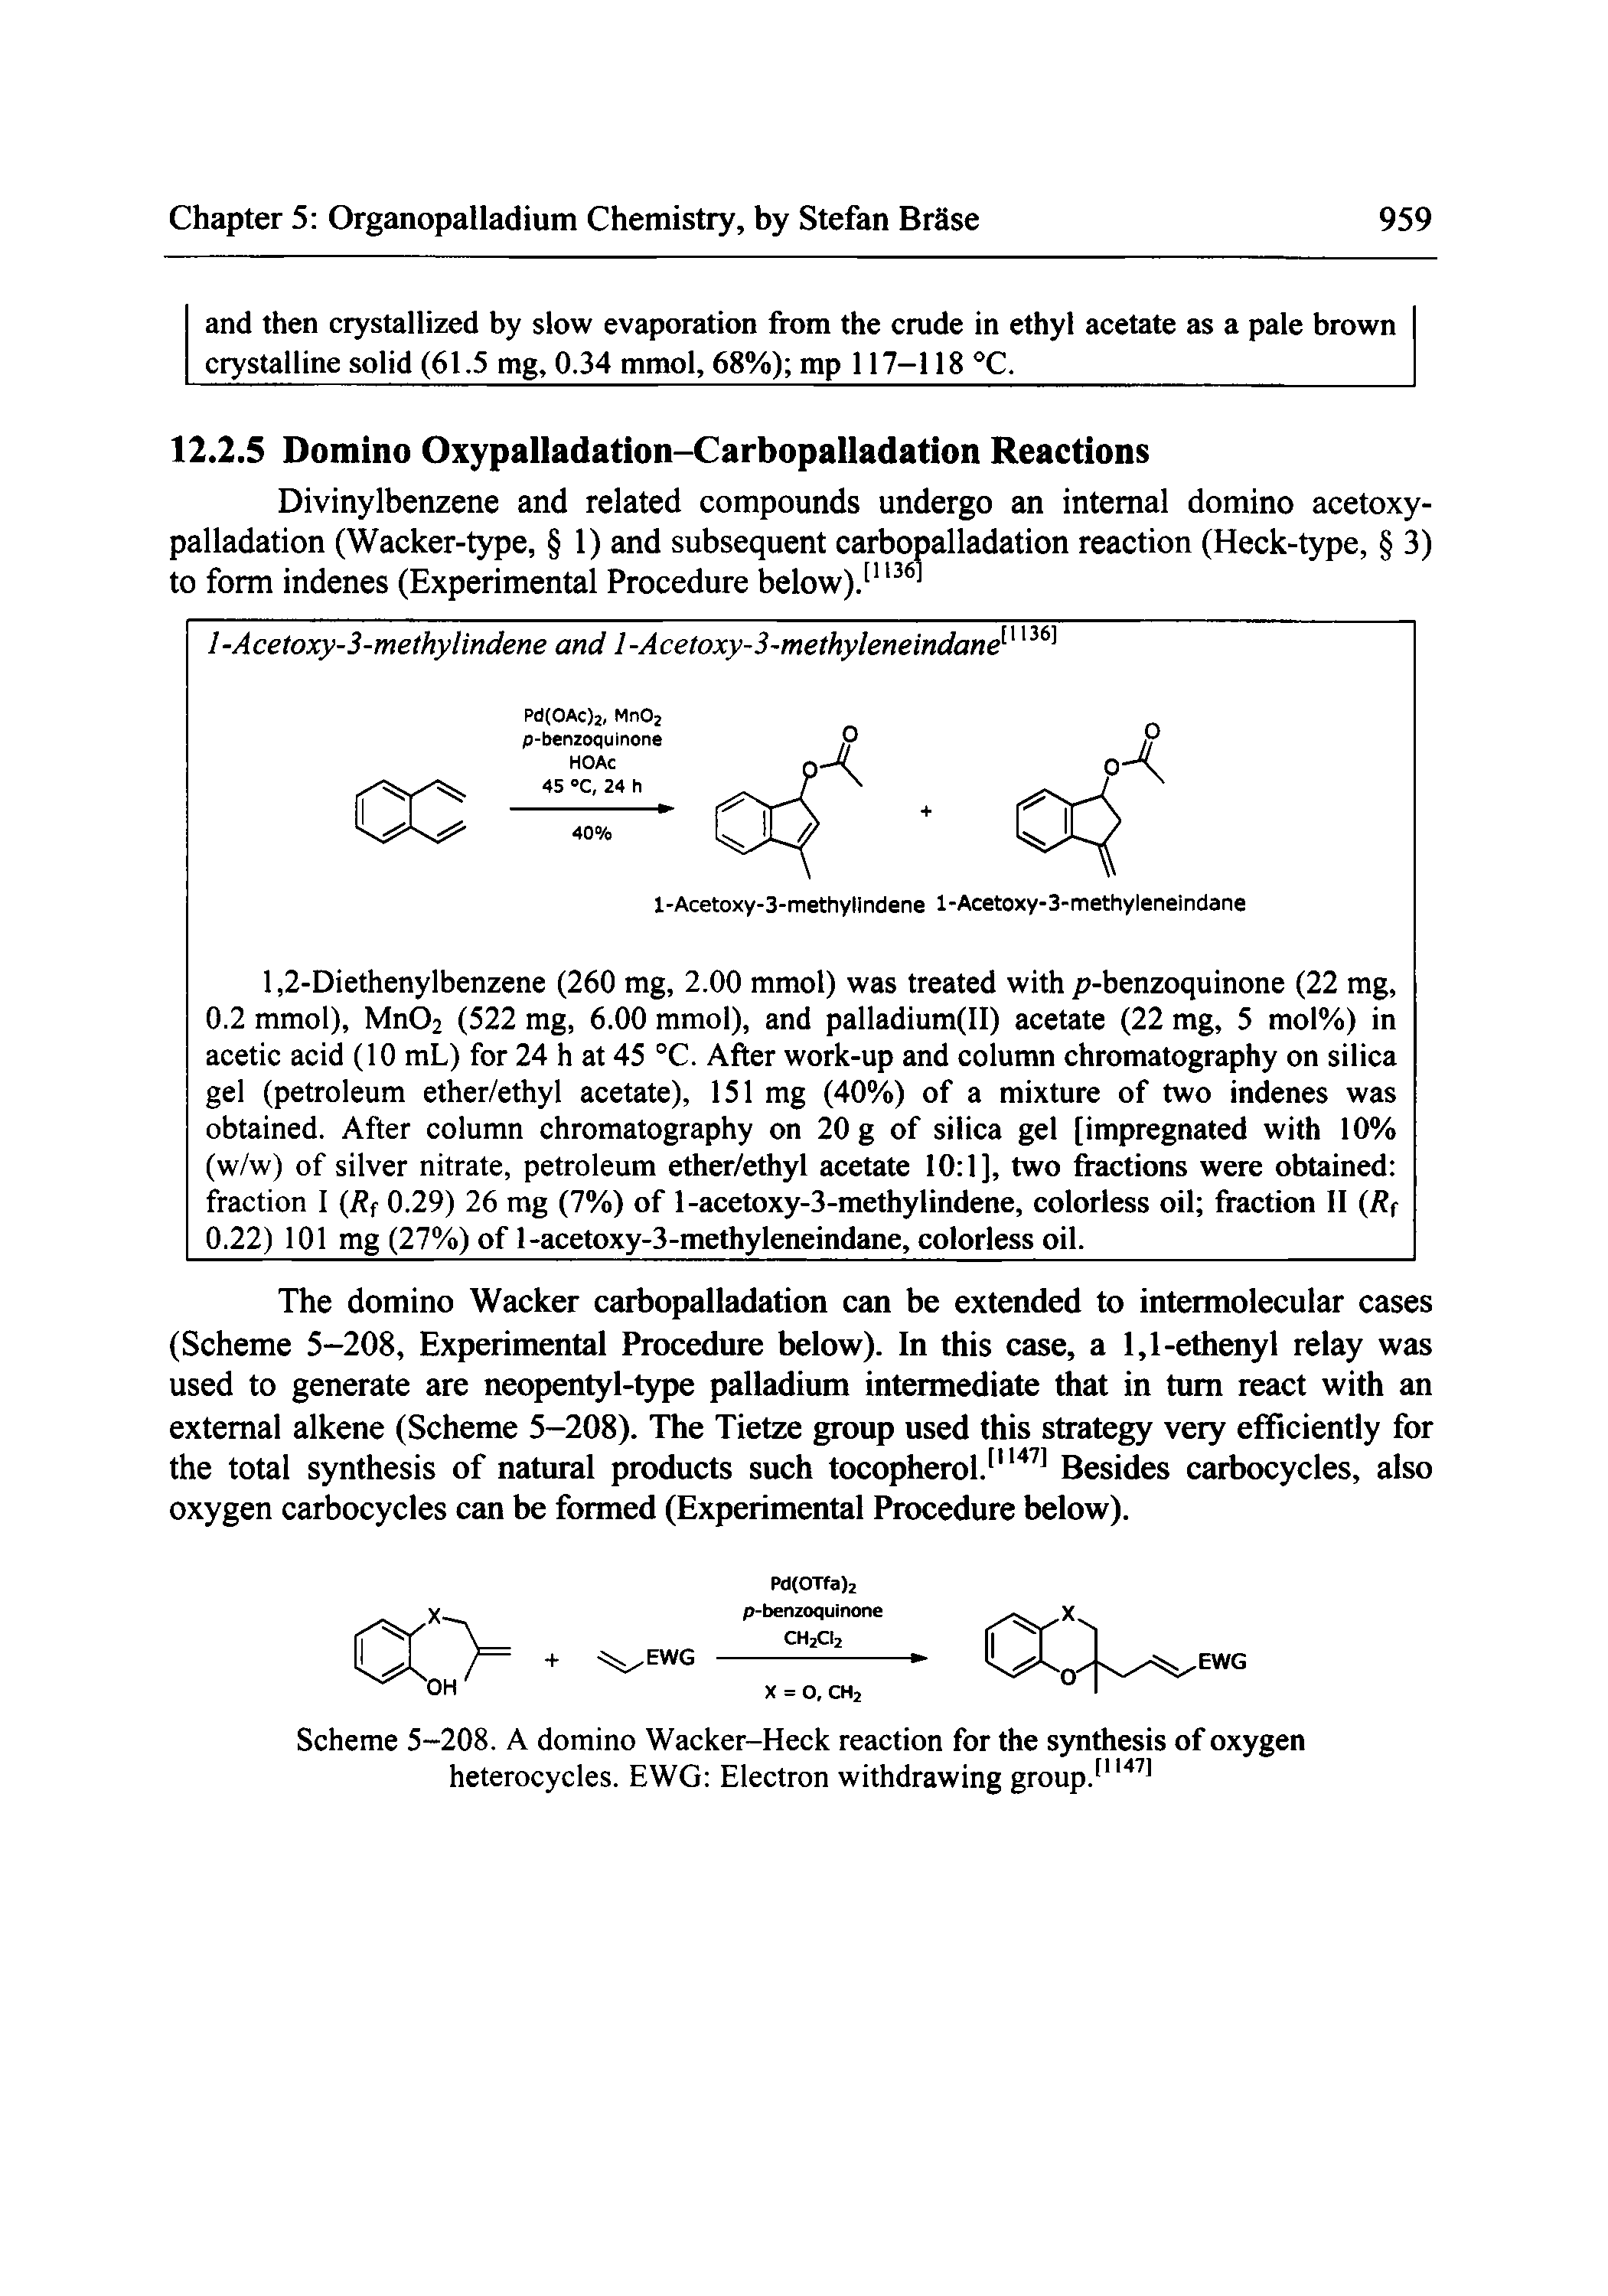 Scheme 5-208. A domino Wacker-Heck reaction for the synthesis of oxygen heterocycles. EWG Electron withdrawing group. ...